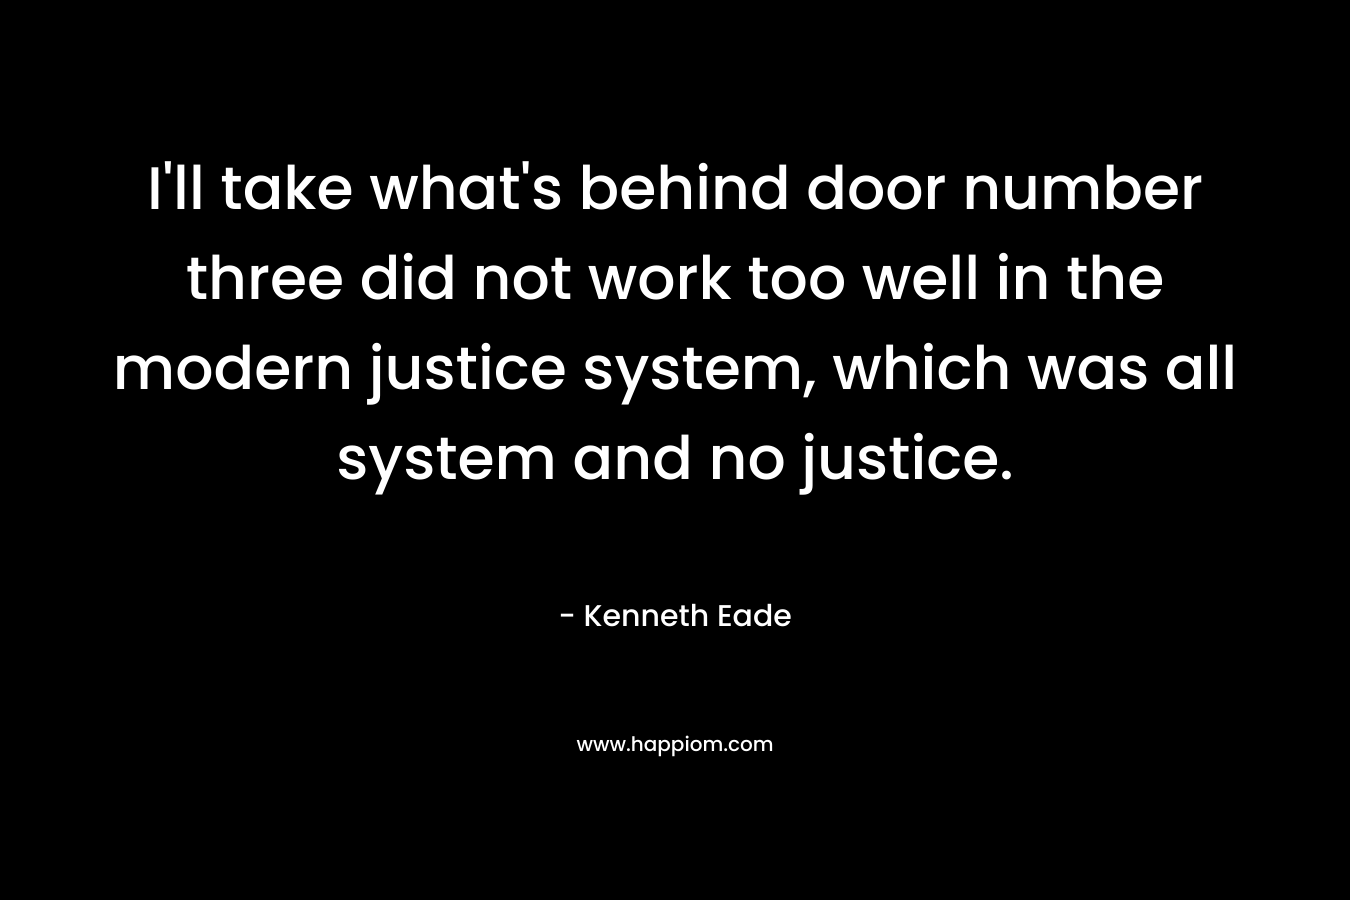 I'll take what's behind door number three did not work too well in the modern justice system, which was all system and no justice.